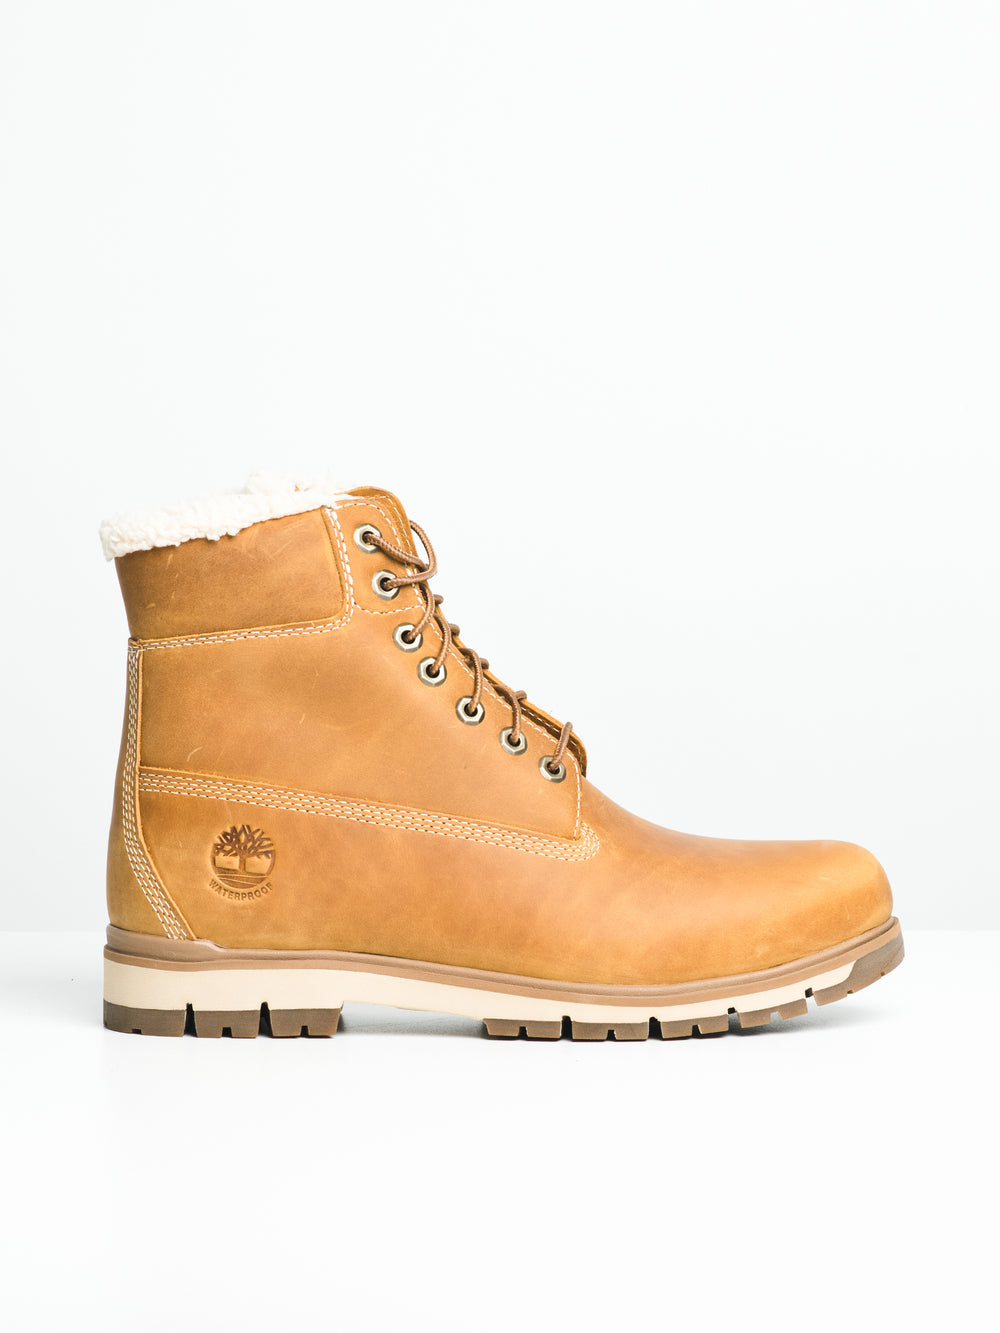 MENS TIMBERLAND RADFORD WP LINED - CLEARANCE